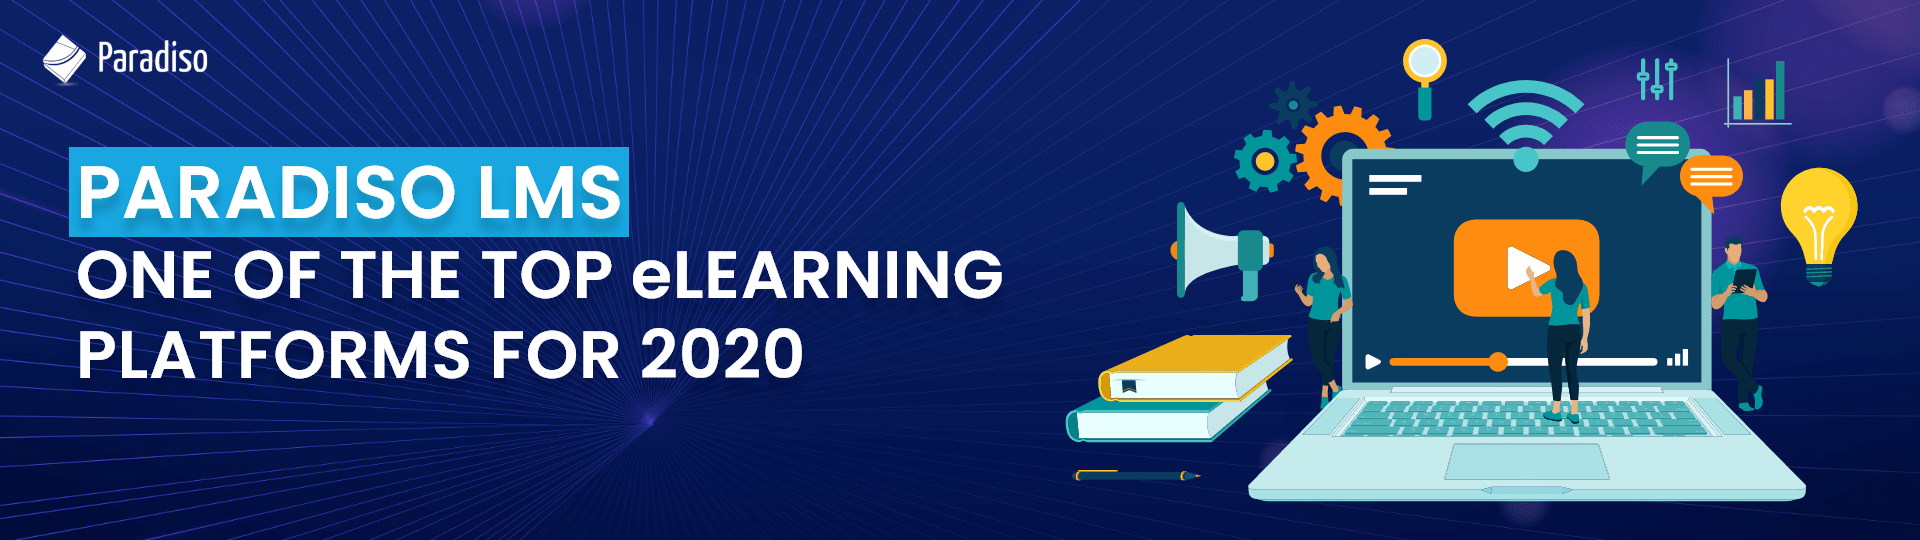 PARADISO LMS ONE OF THE TOP eLEARNING PLATFORMS FOR 2021